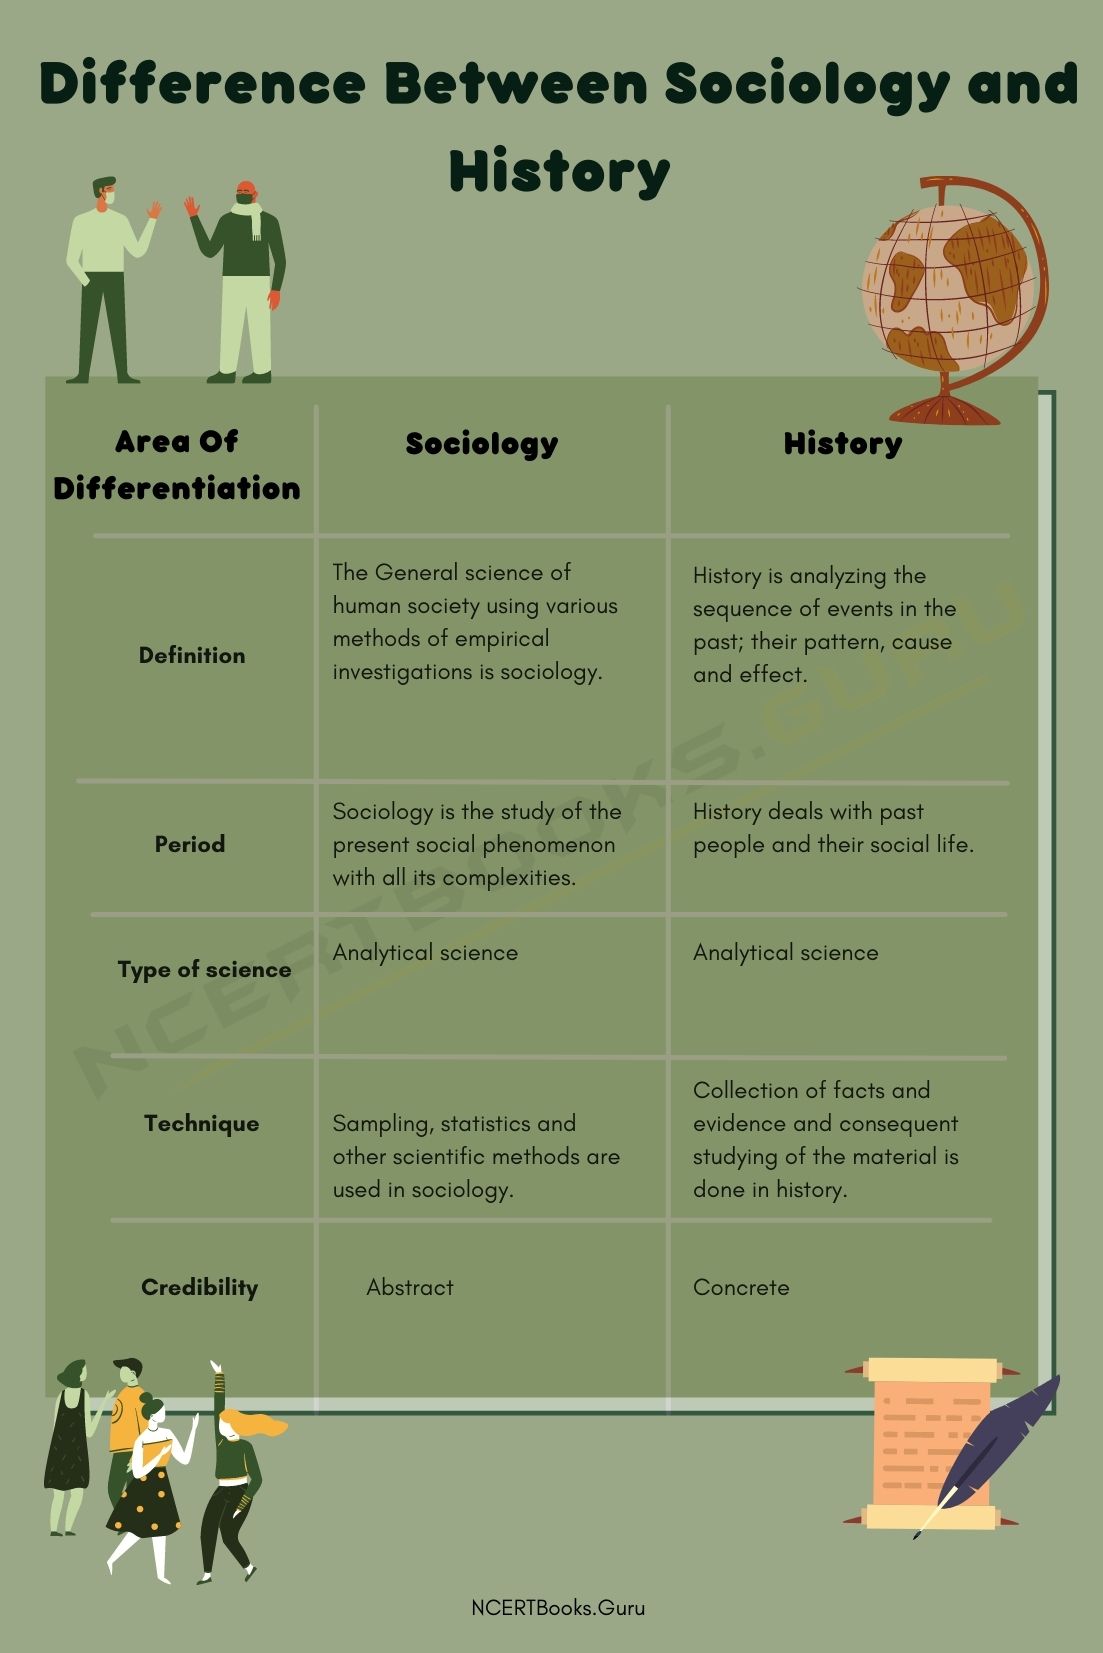 Difference Between Sociology and History2